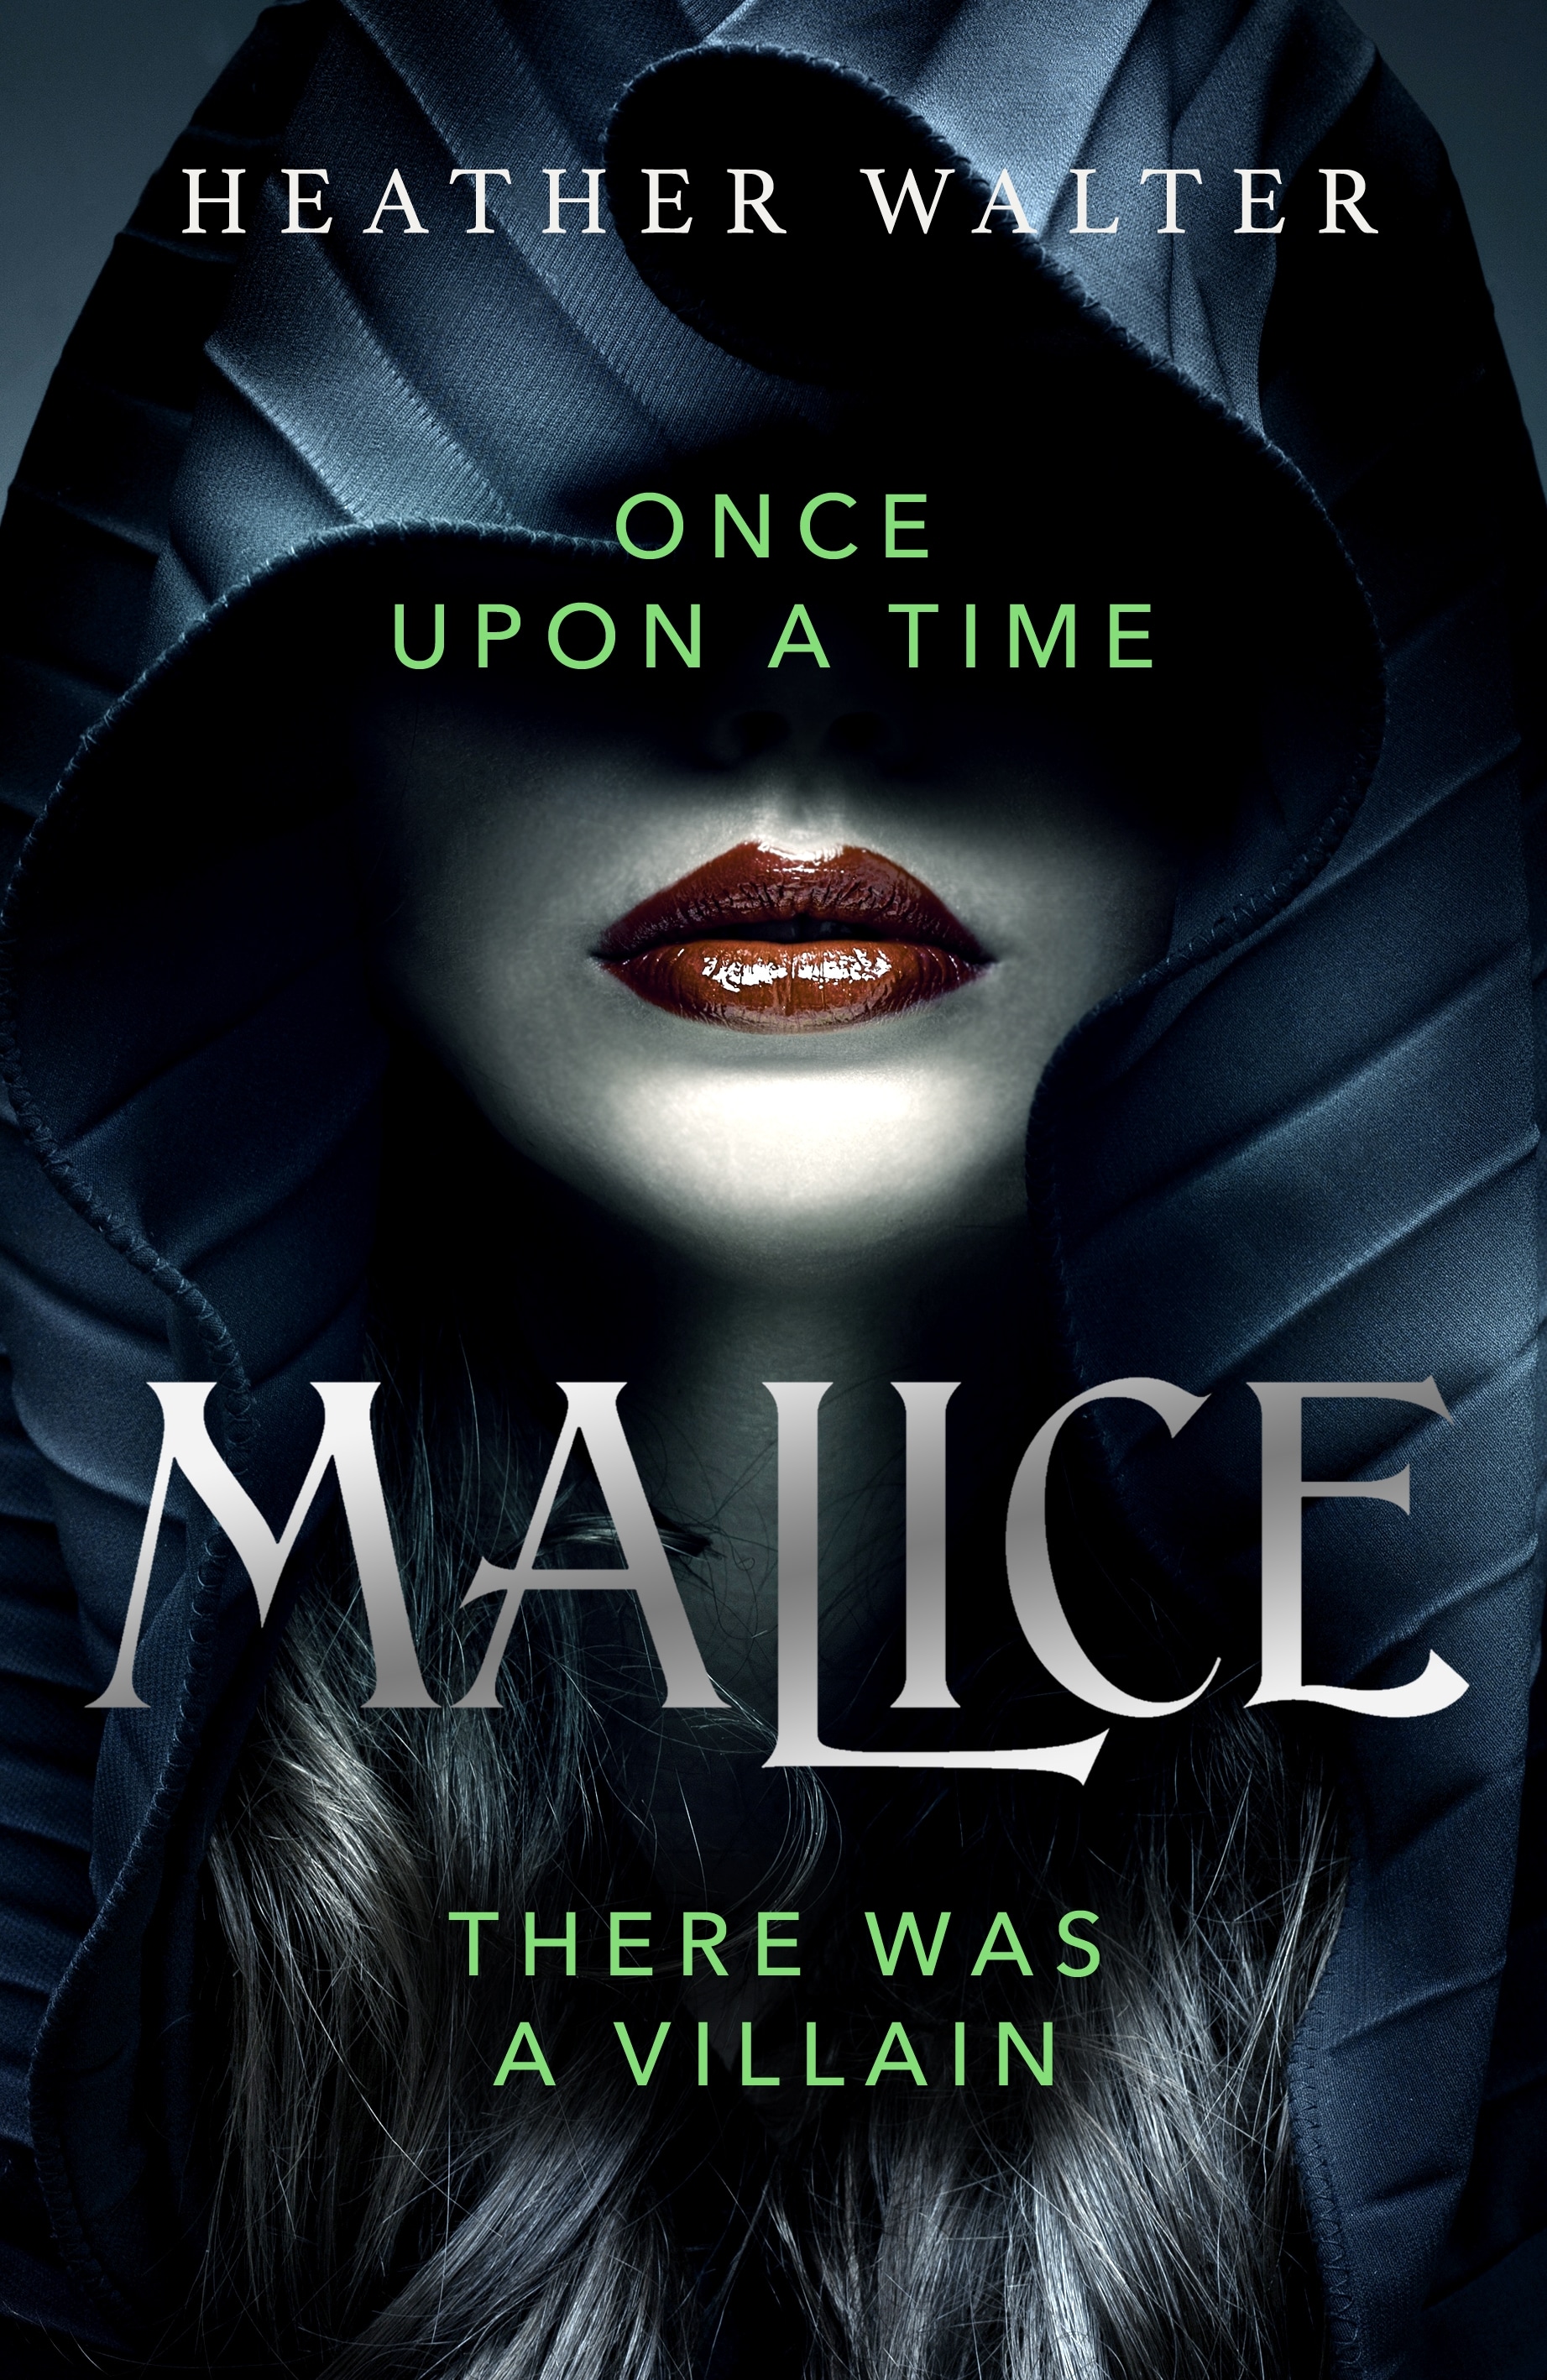 Book “Malice” by Heather Walter — April 13, 2021